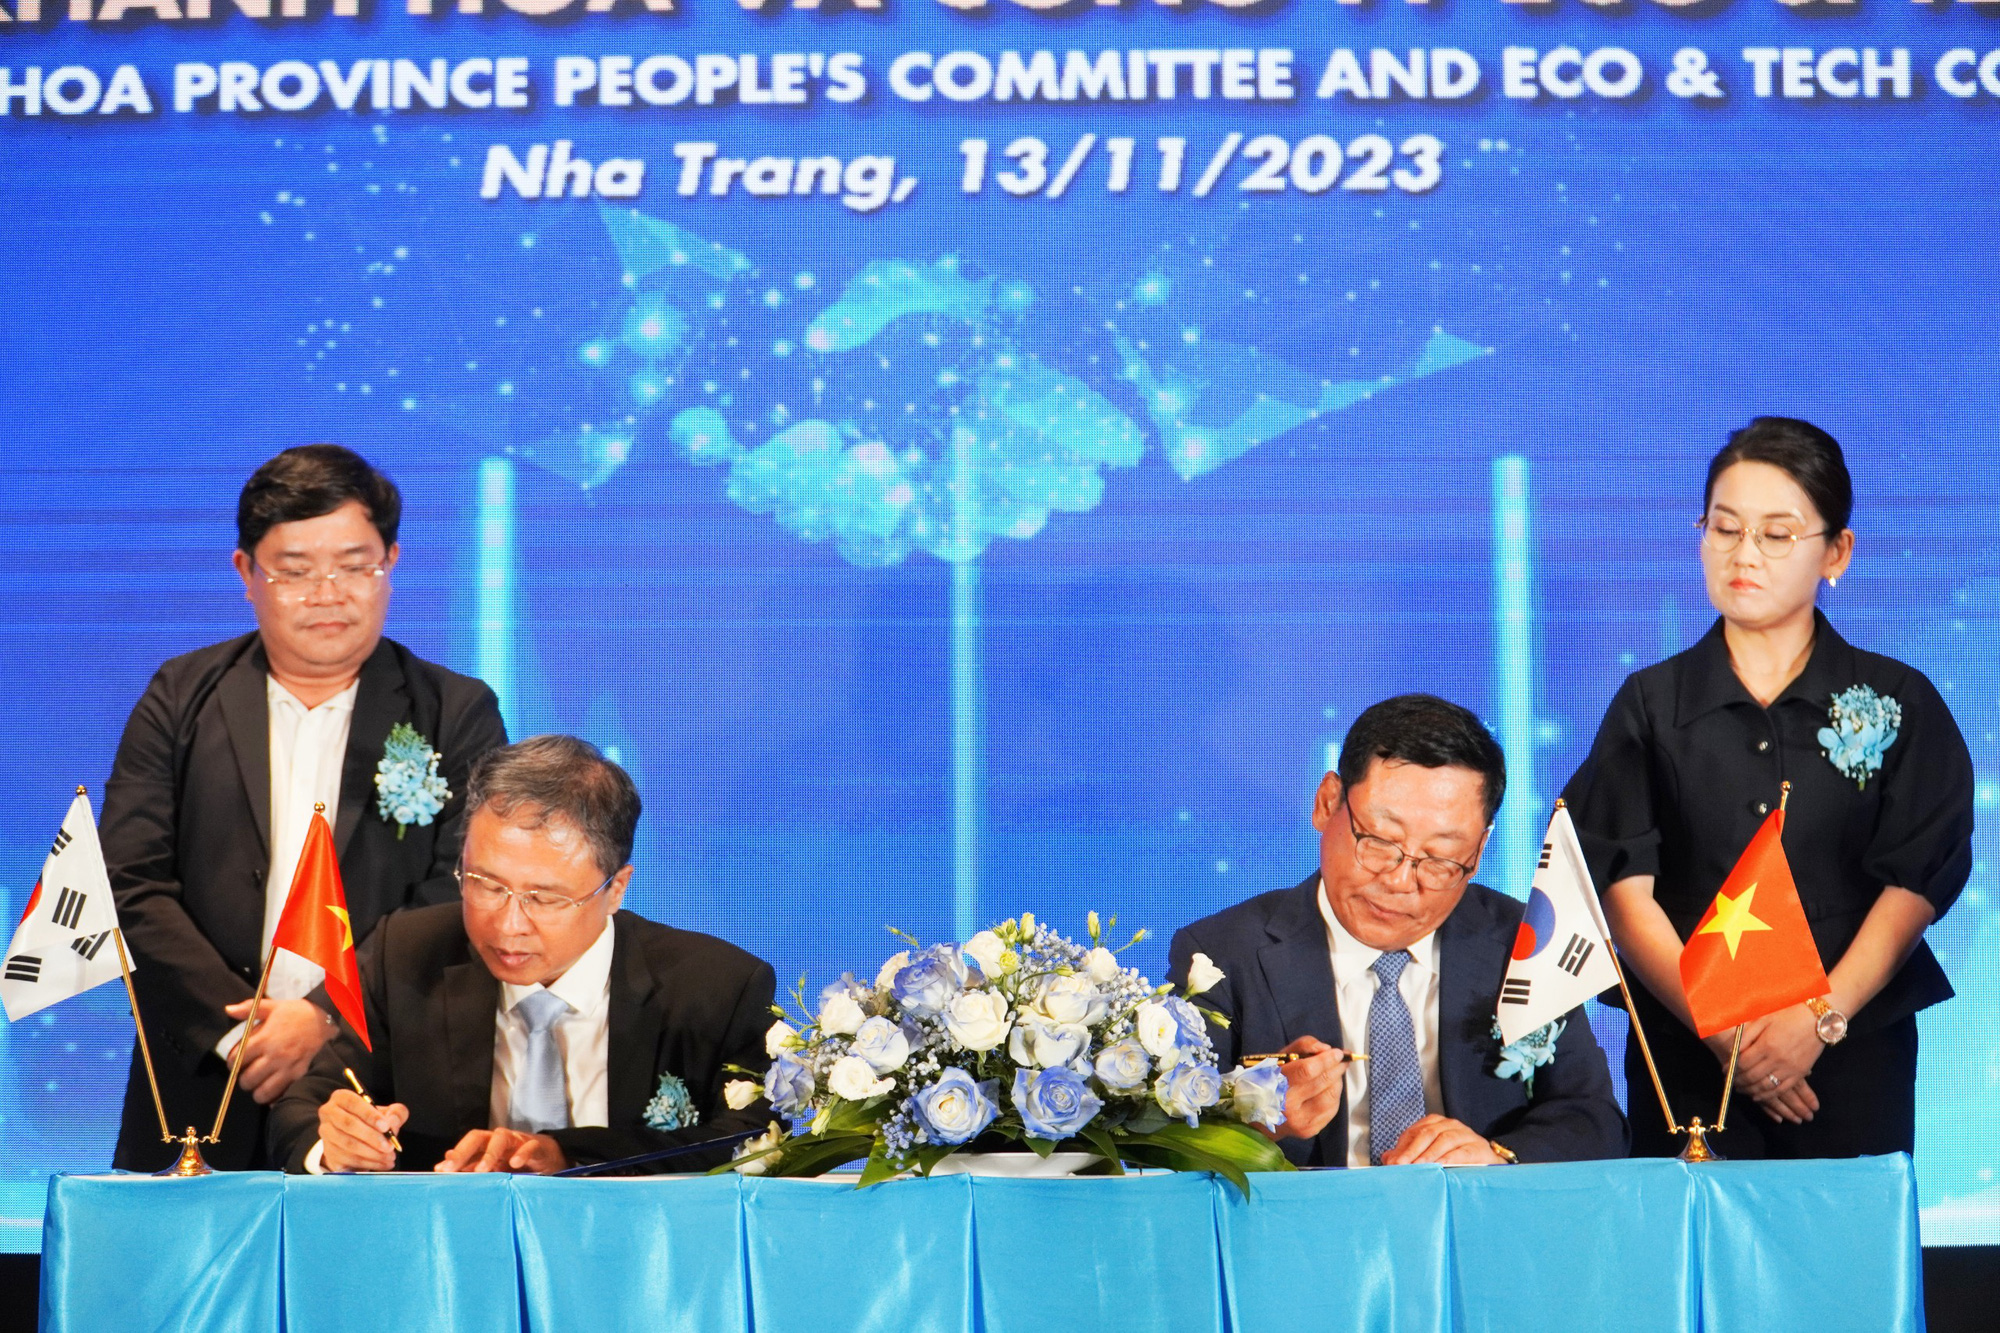 Signing ceremony of the memorandum between Khanh Hoa Province and Eco & Tech Company to create a primate breeding area for scientific research - Photo: Tran Hoai